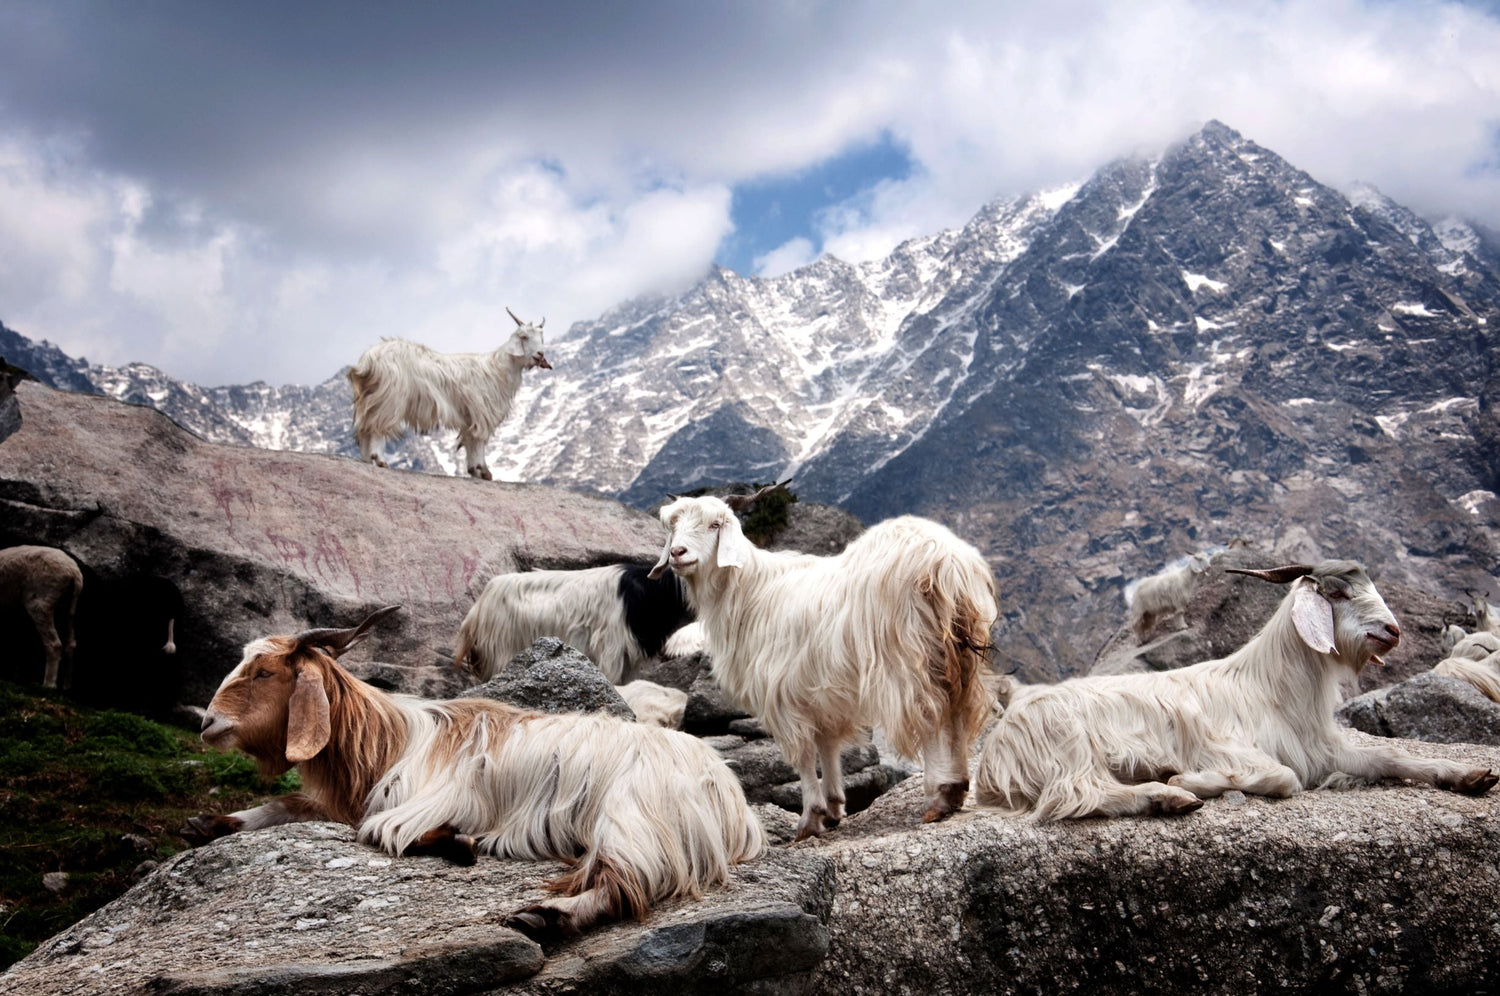 Laal exquisite handmade 100% cashmere collection. Cashmere goats in Hamalayas.